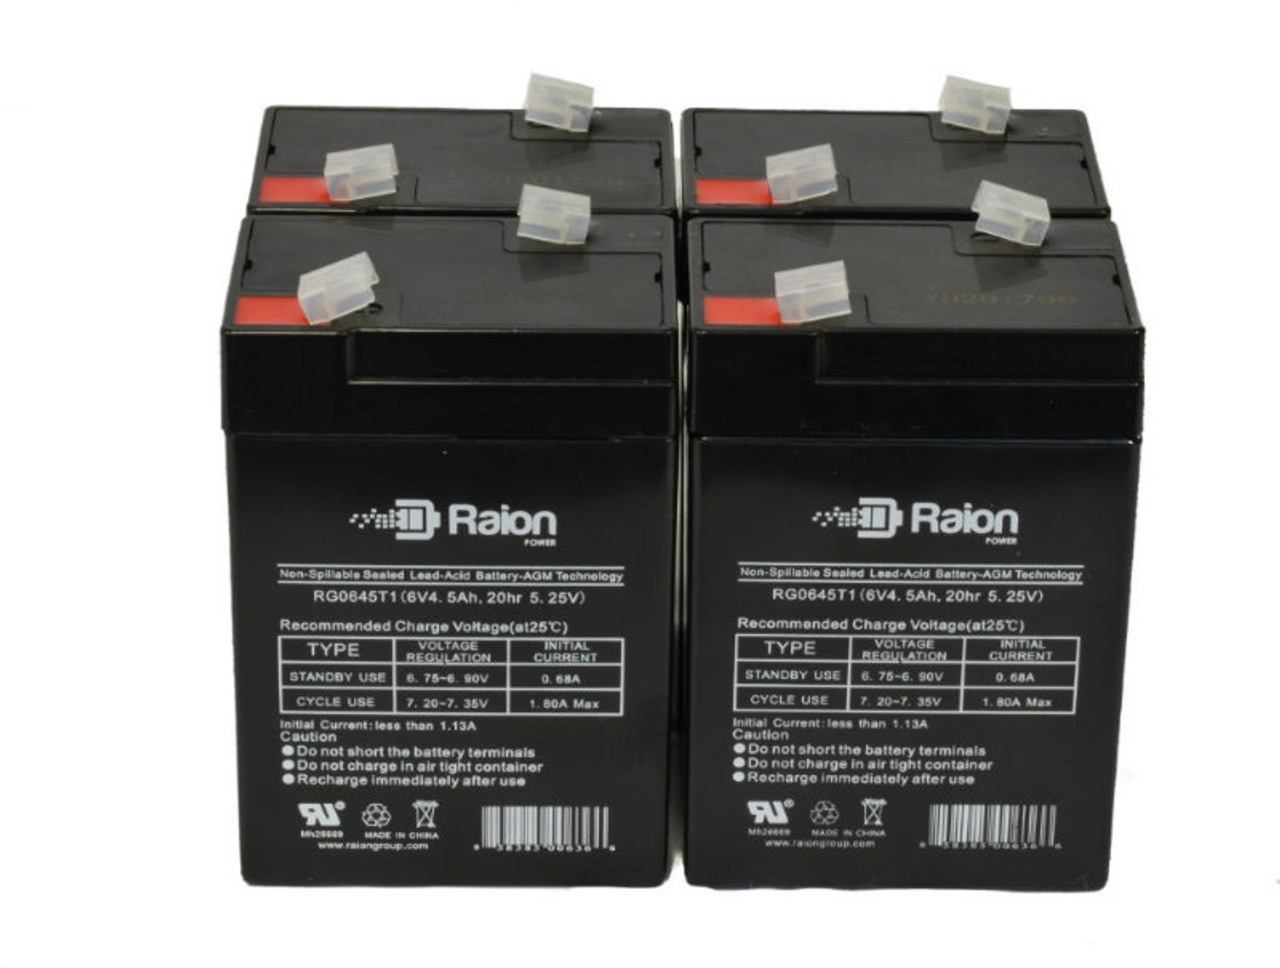 Raion Power 6V 4.5Ah Replacement Emergency Light Battery for Emergency EML-990 - 4 Pack